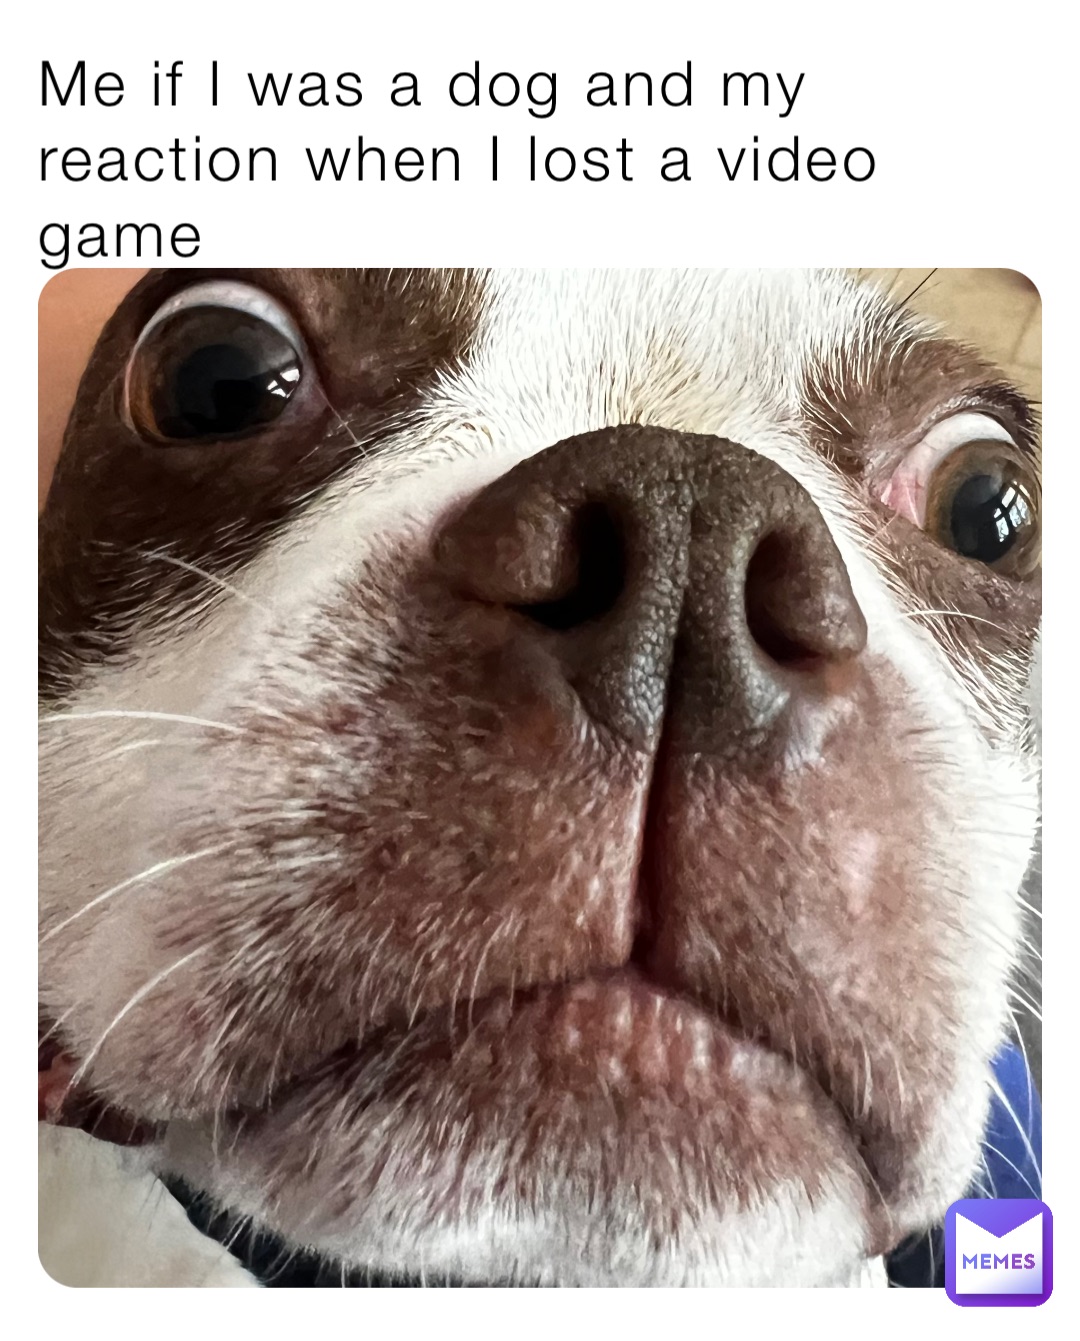 Me if I was a dog and my reaction when I lost a video game